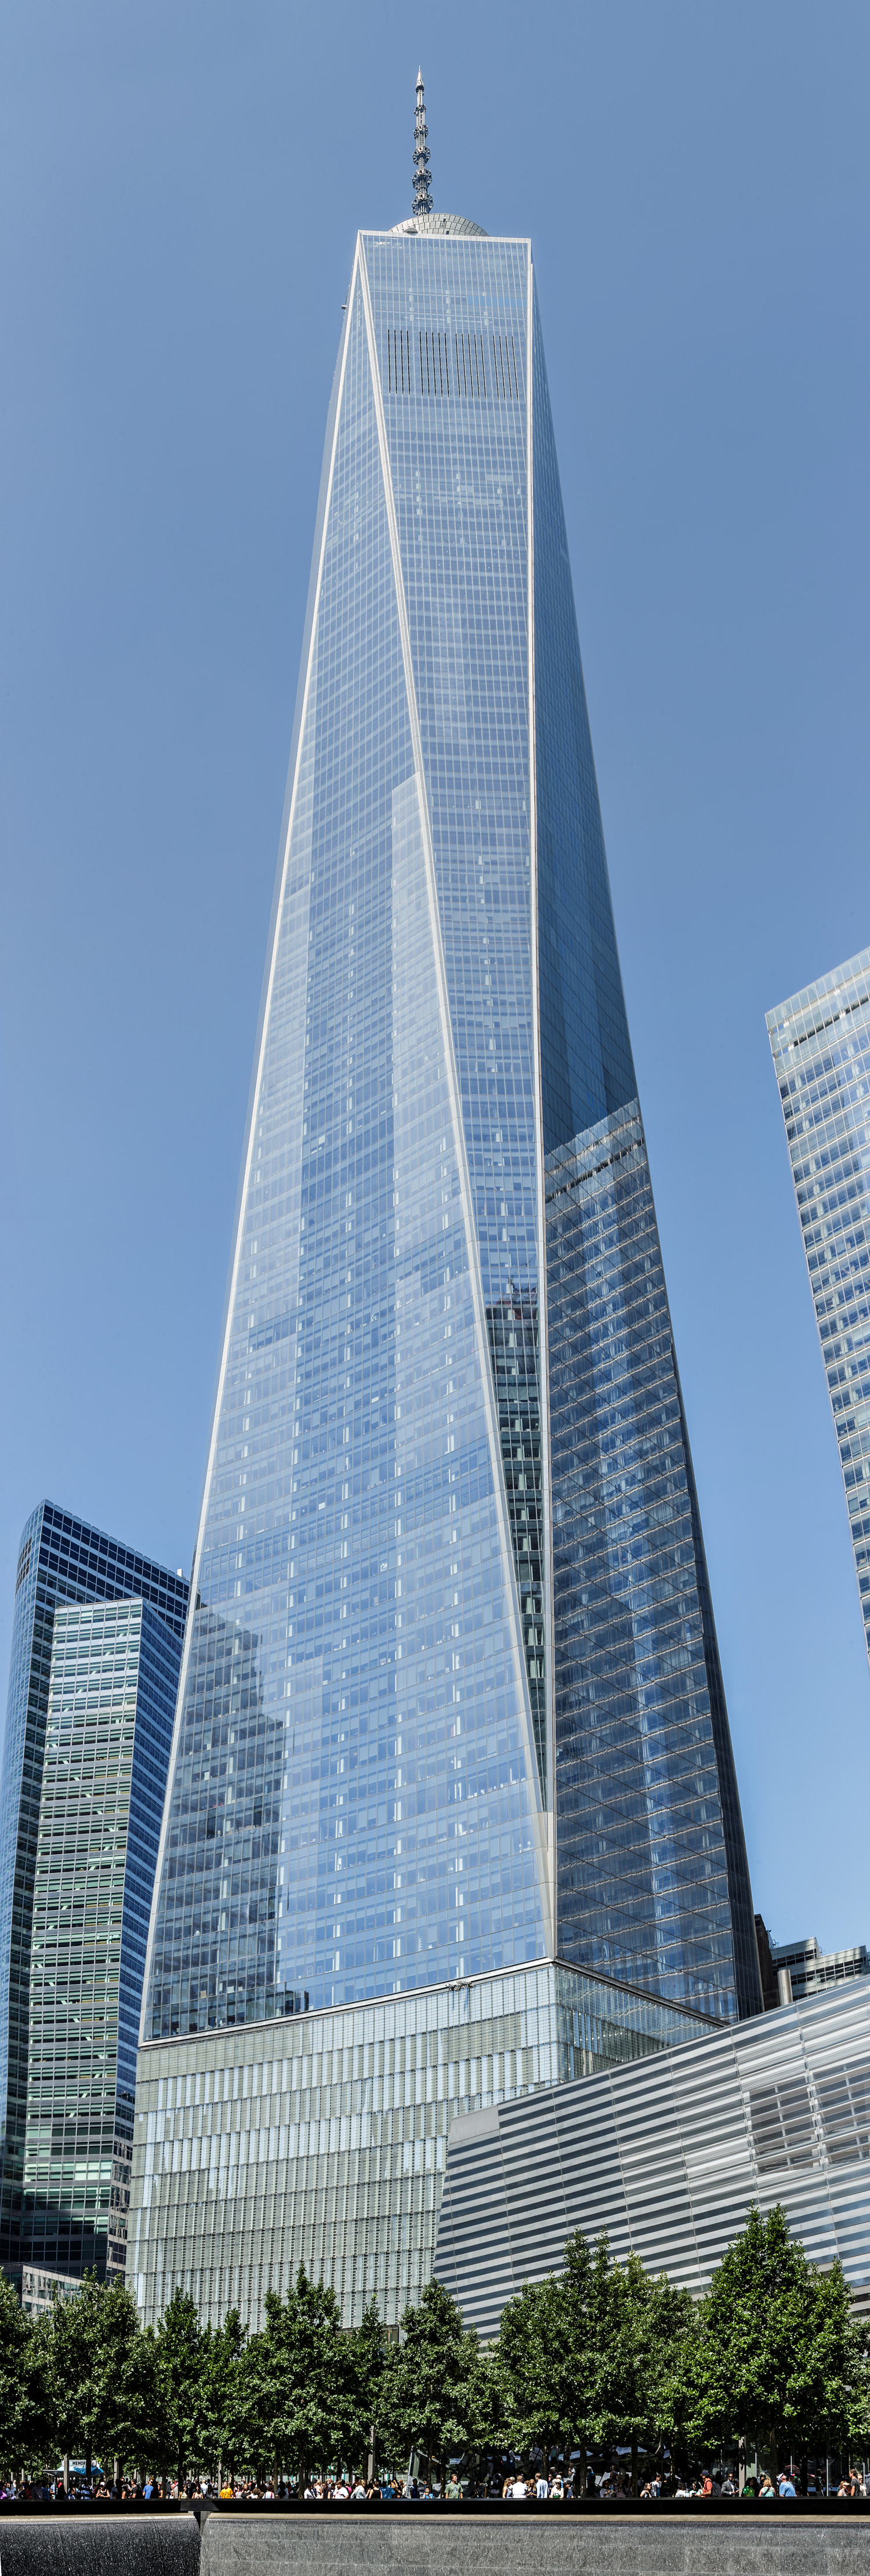 One World Trade Center - View from the south 